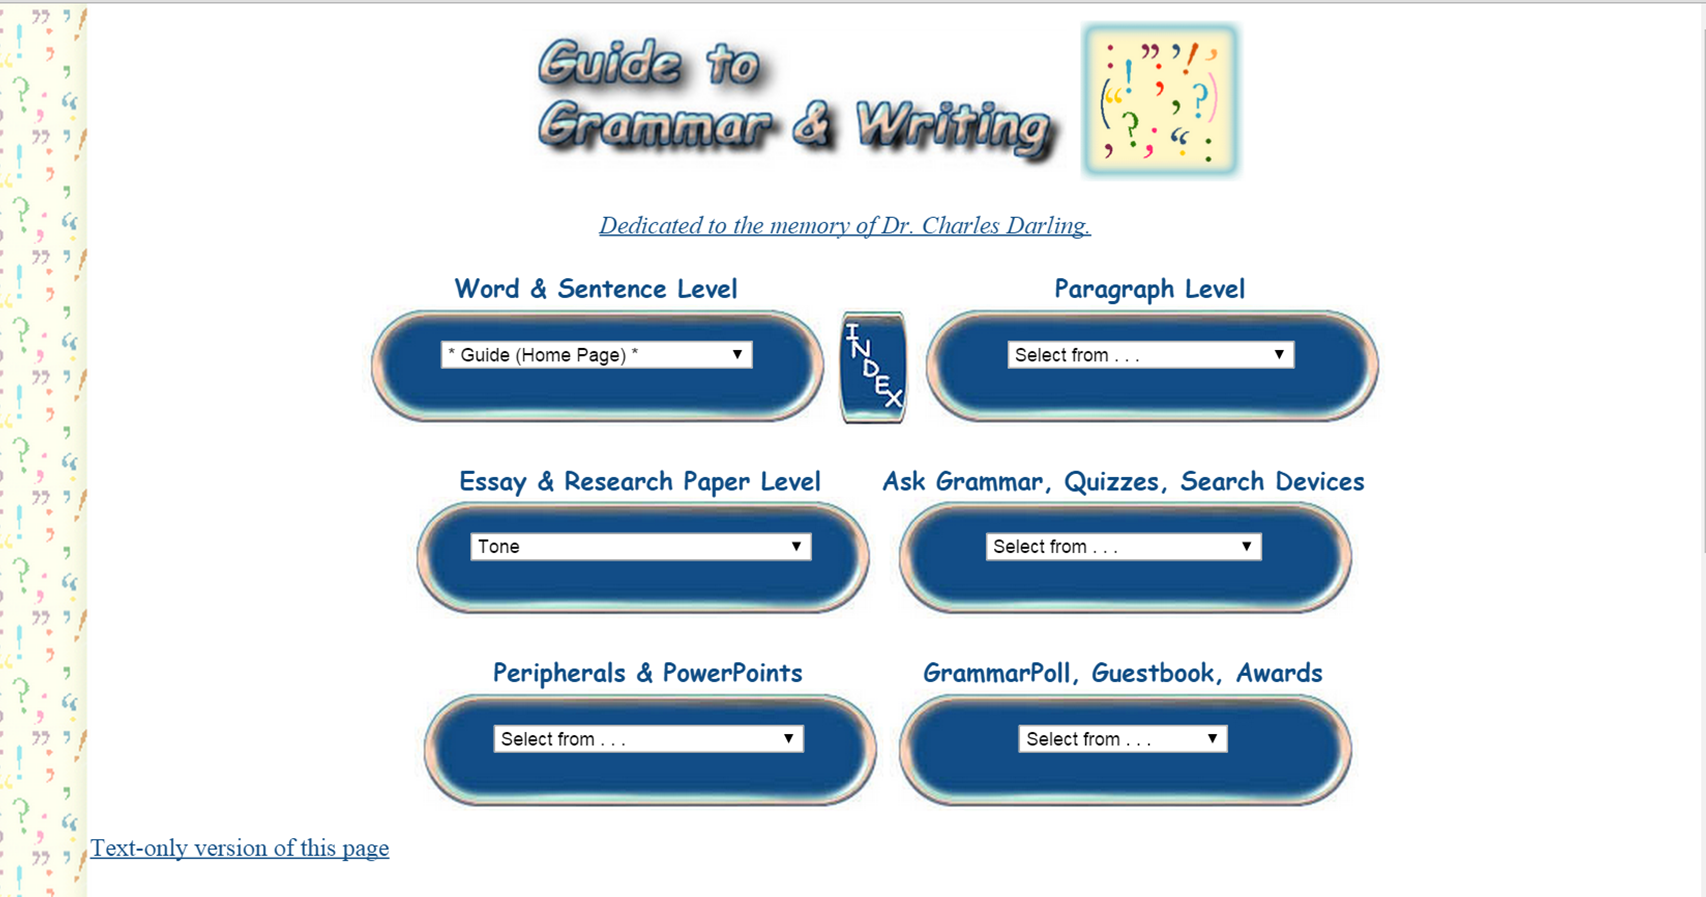 Guide to Grammar & Writing